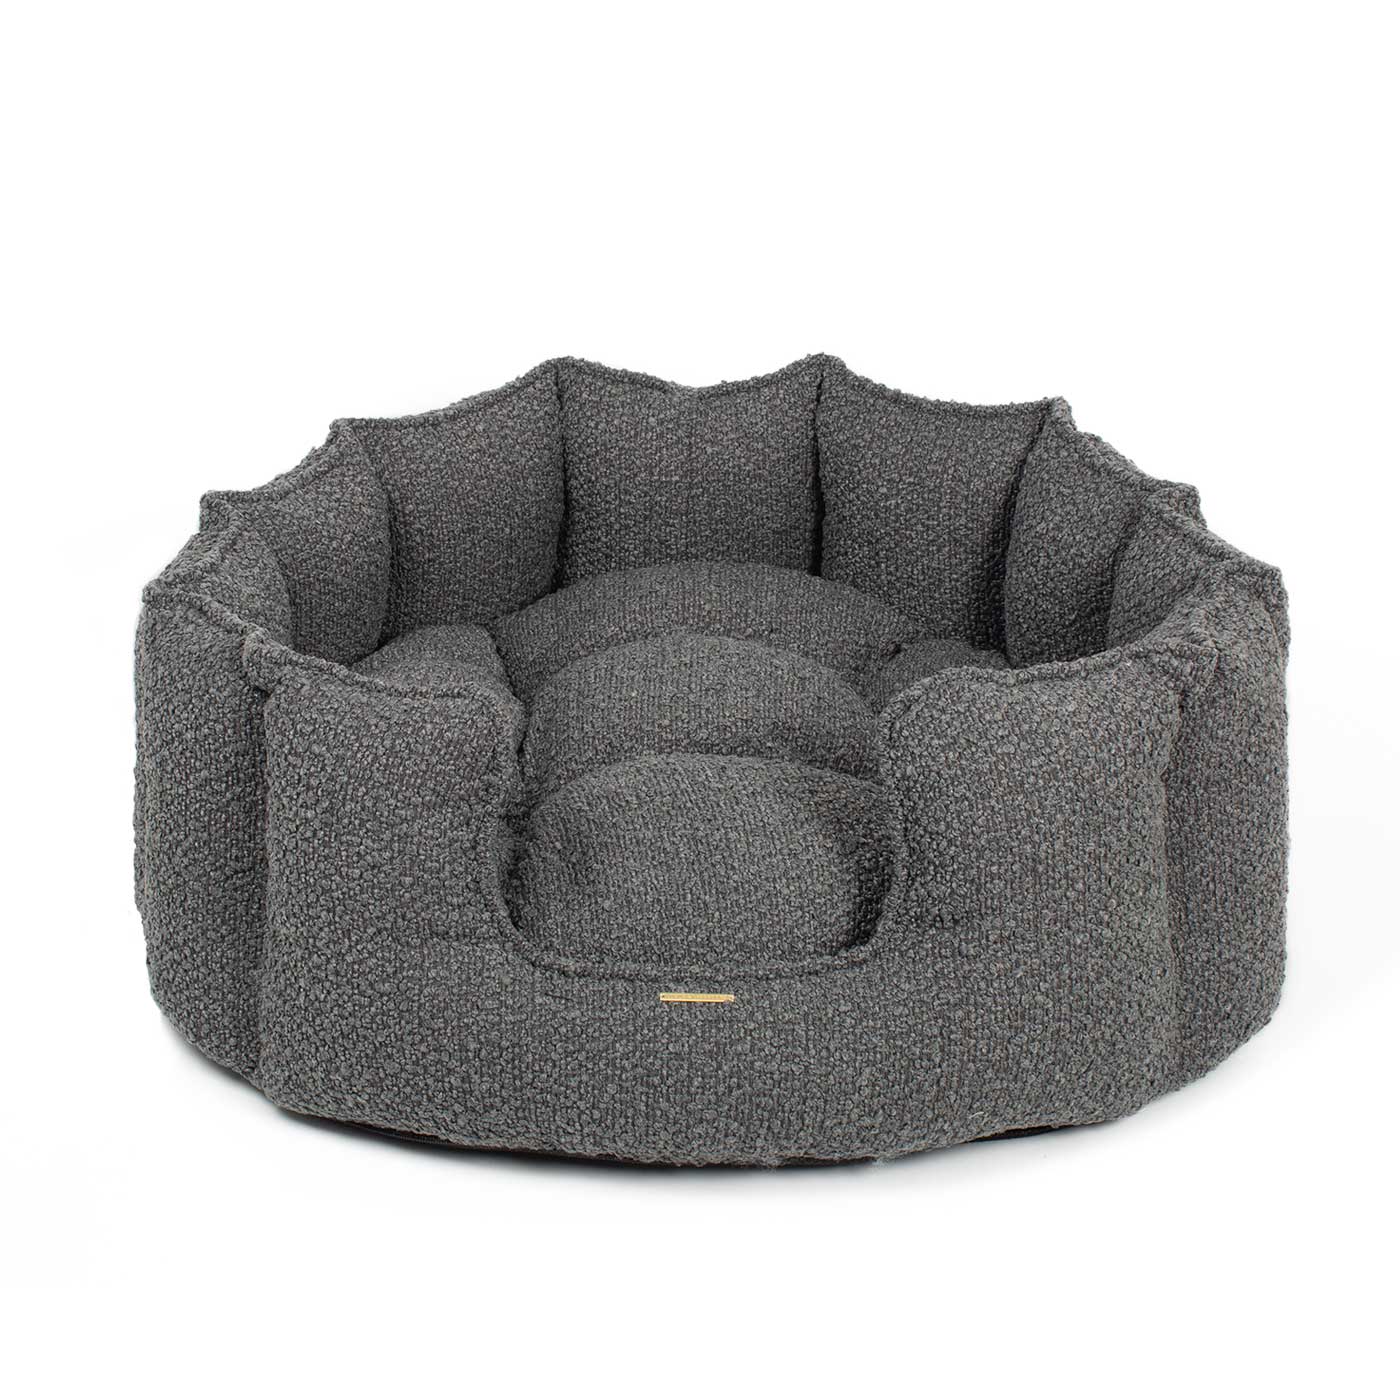 [color:granite boucle]  Discover Our Luxurious High Wall Bed For Dogs, Featuring inner pillow with plush teddy fleece on one side To Craft The Perfect Dogs Bed In Stunning Granite Bouclé! Available To Personalize Now at Lords & Labradors US